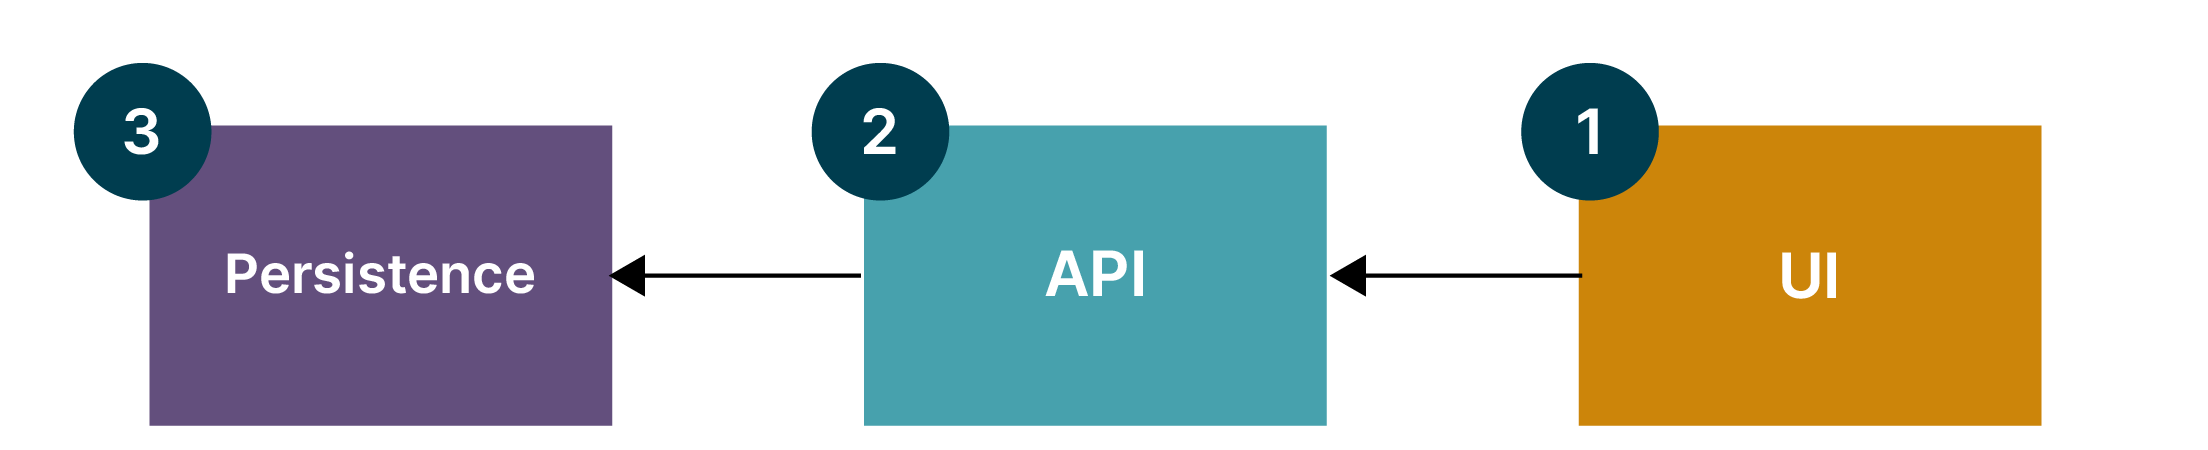 Developing outside in implies that you need to work in precisely the opposite way than what we thought was needed to avoid breaking the application, beginning with UI, and then moving to API and persistence.